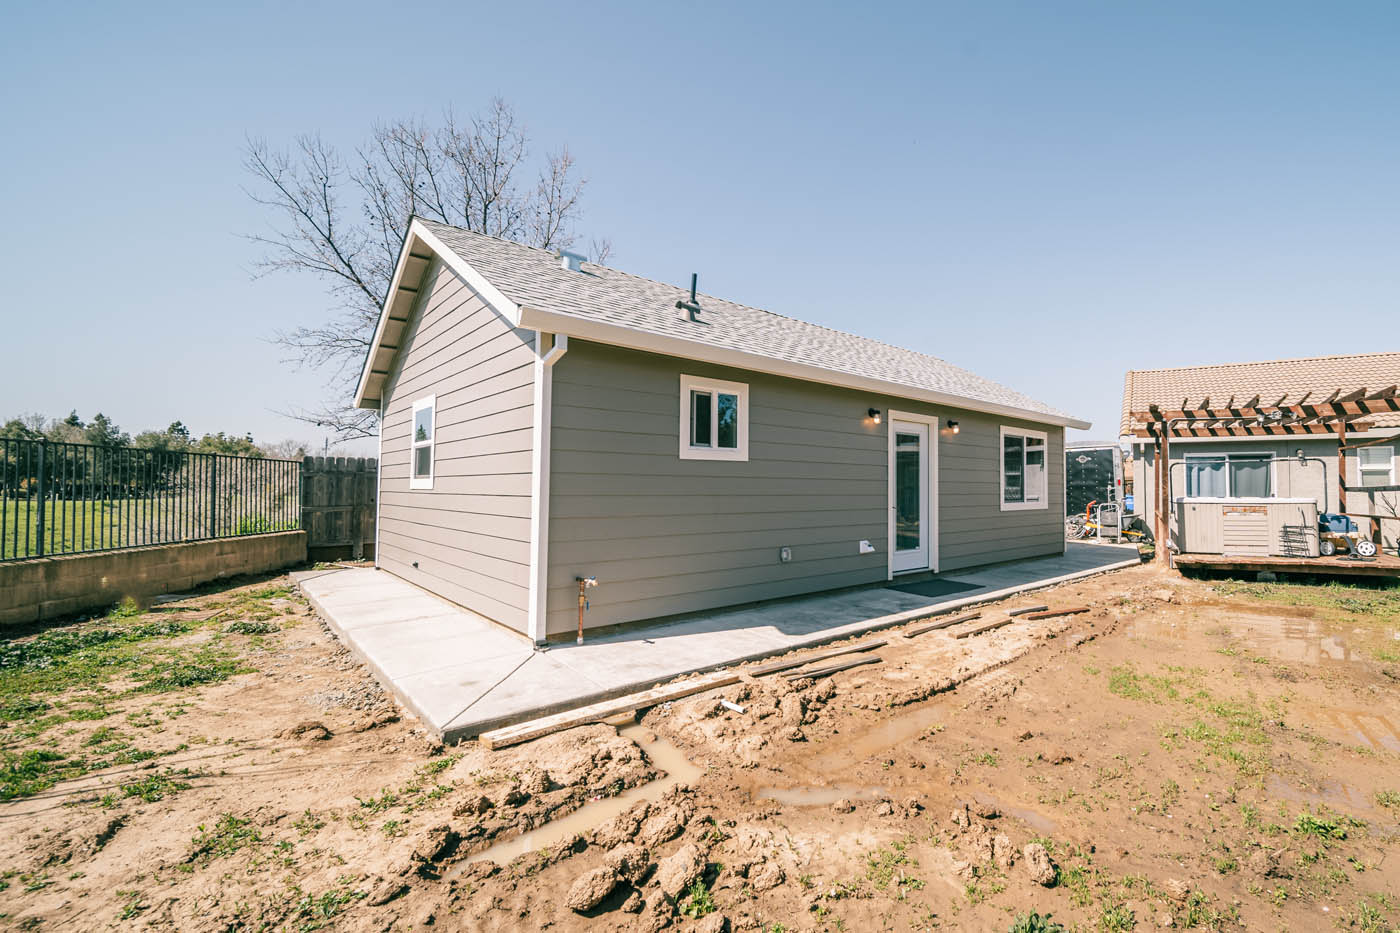 Anchored Tiny Homes ADU Gallery: 2-Bedroom ADUs.